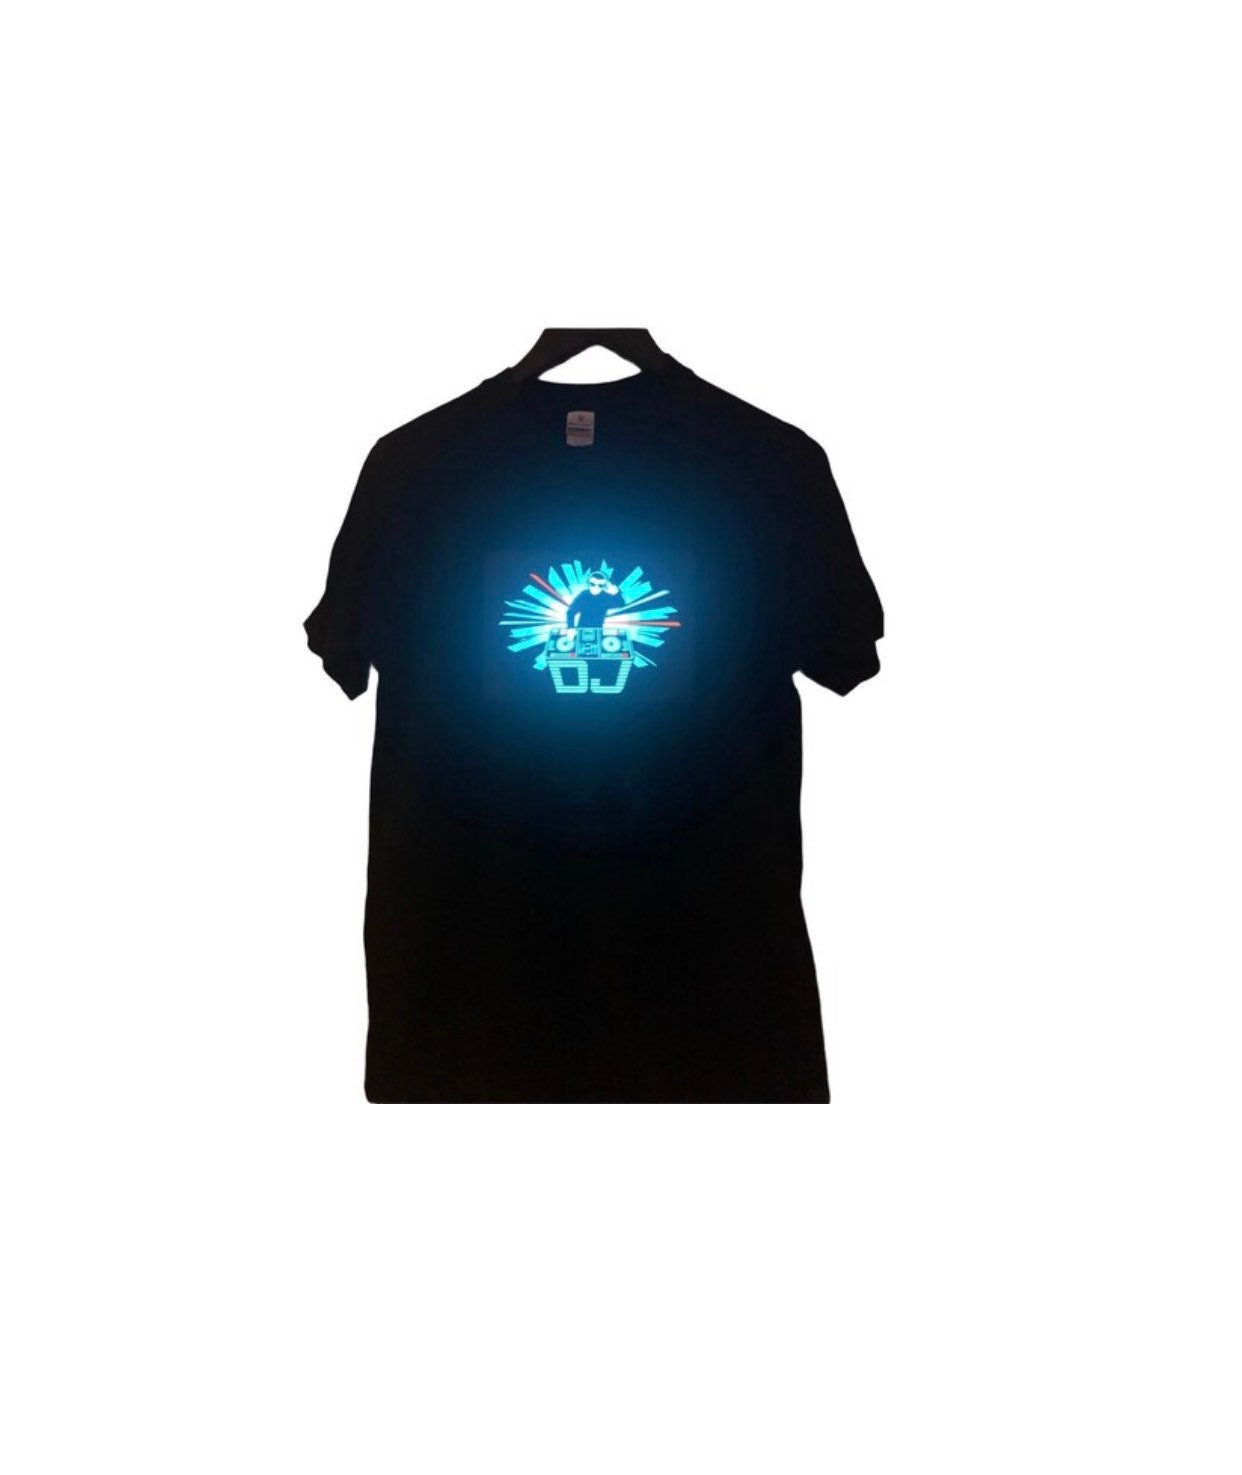 It’s Moving With Rhythm Of Music Or Any Voices Music Gift Gift For Him/Her Music Equaliser Led Light Up T-shirt